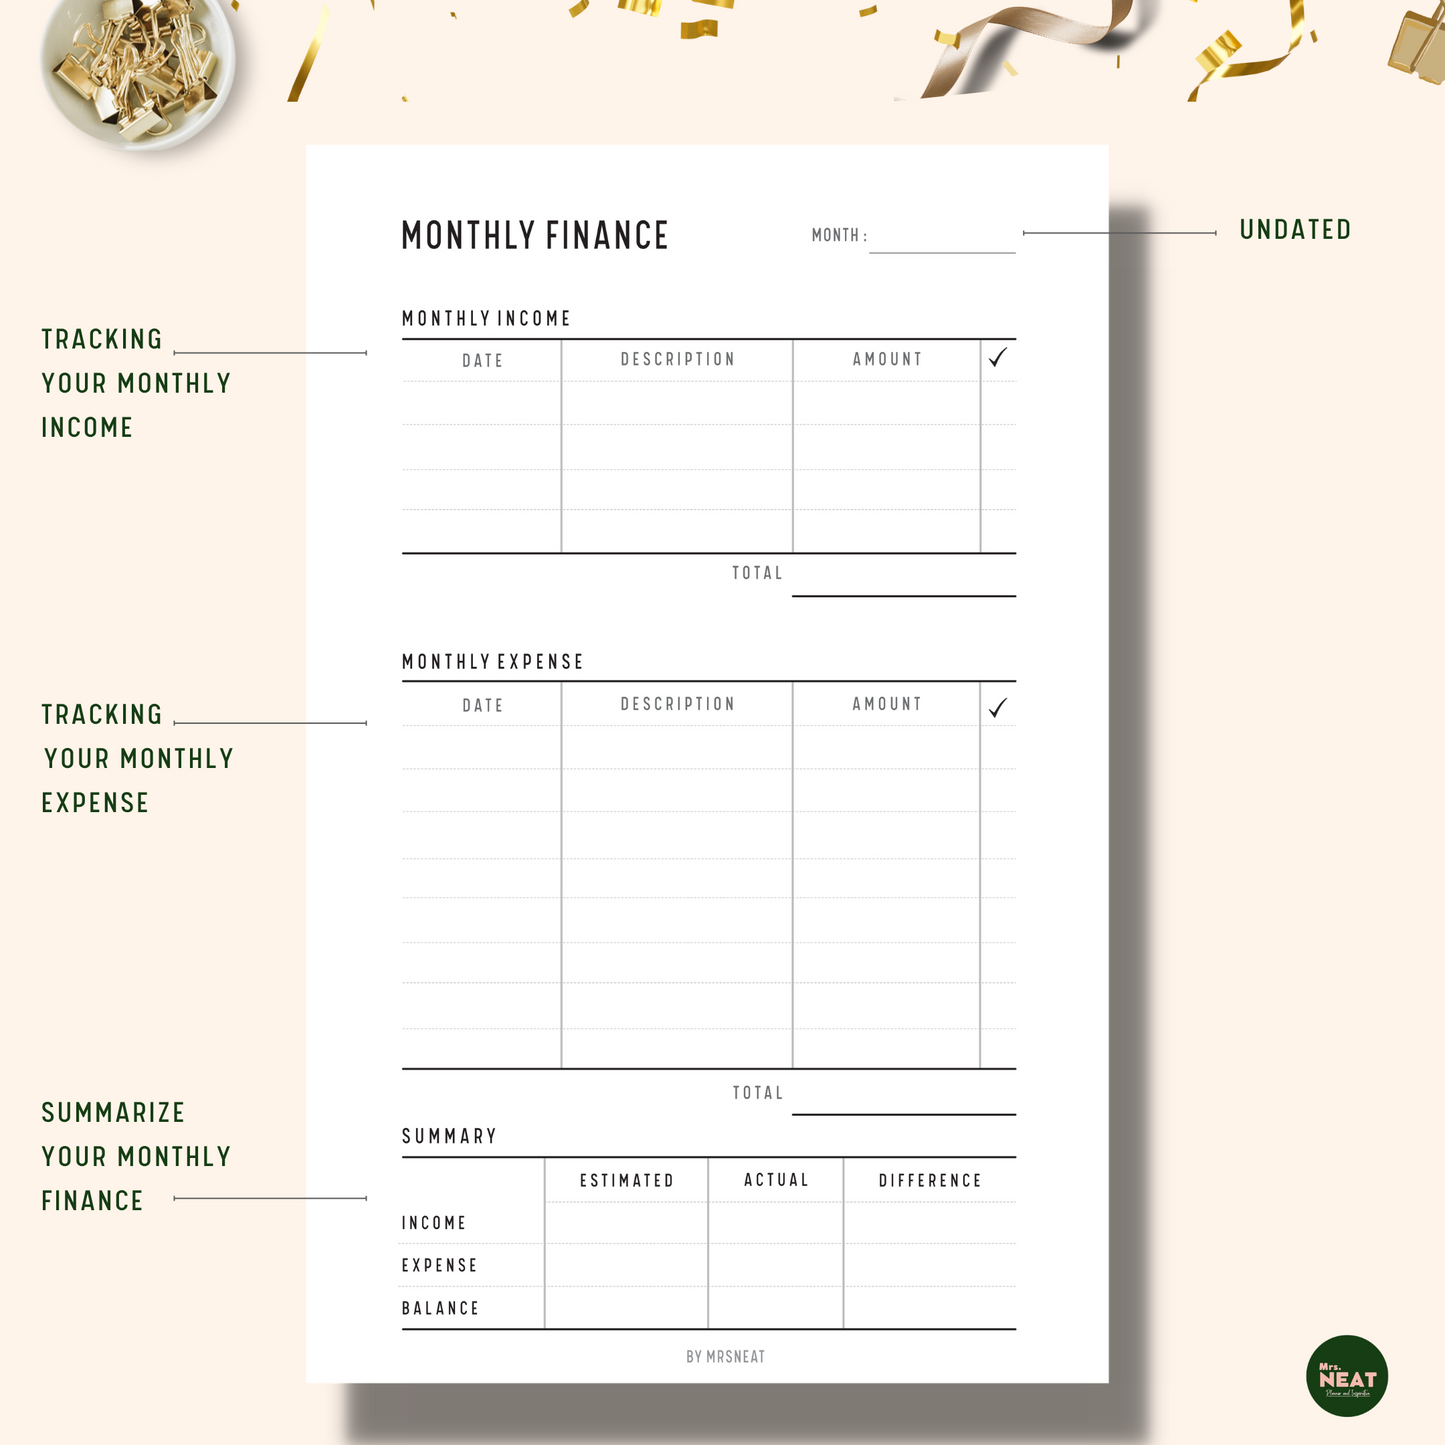 Monthly Finance Planner with room for capture monthly income, monthly expenses and monthly financial summarize